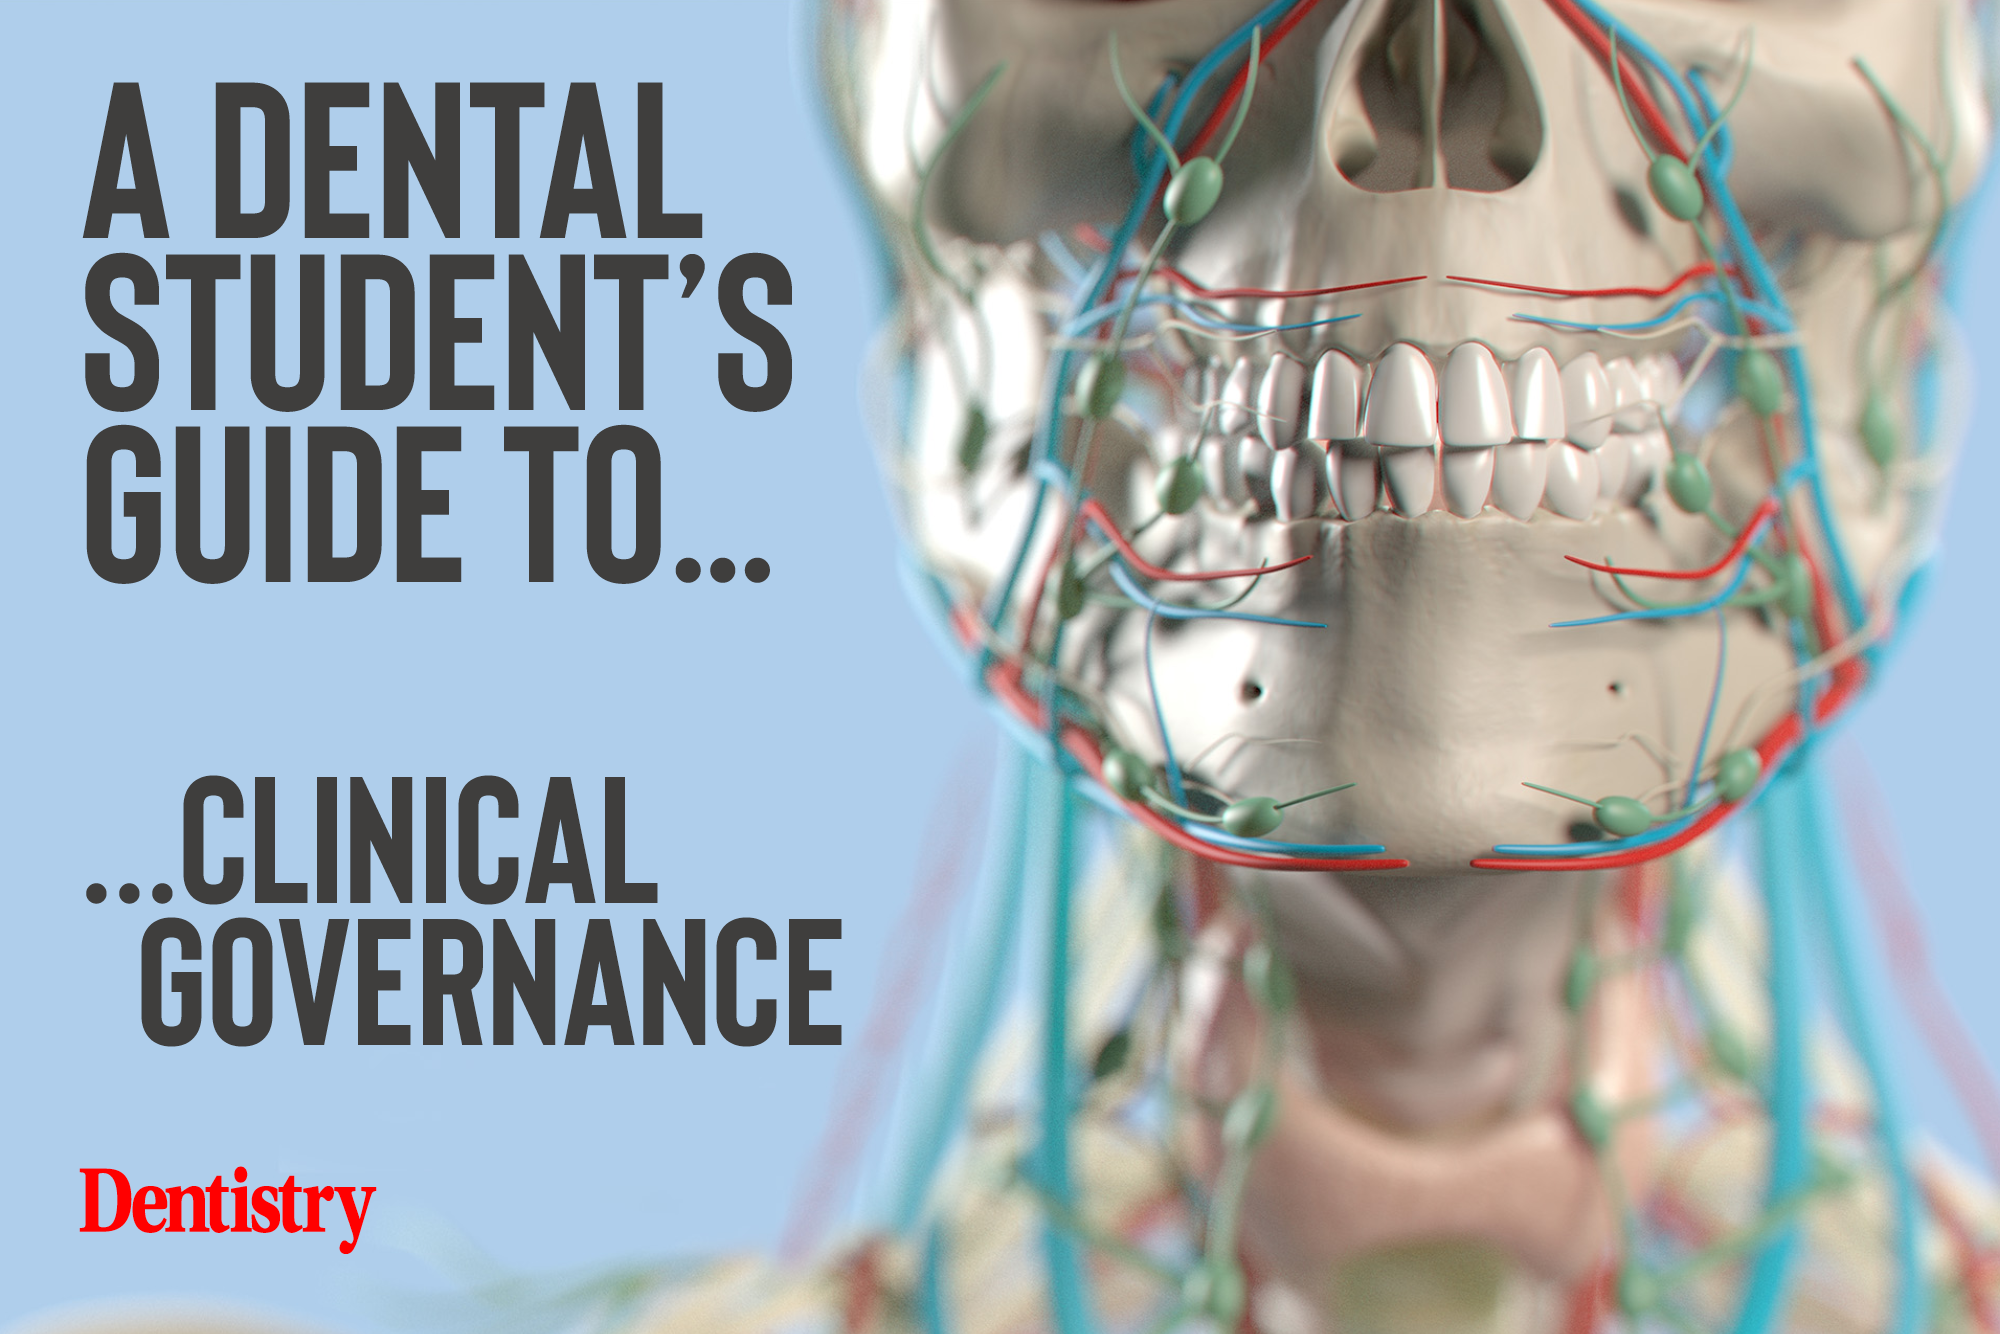 A dental student’s guide to…clinical governance